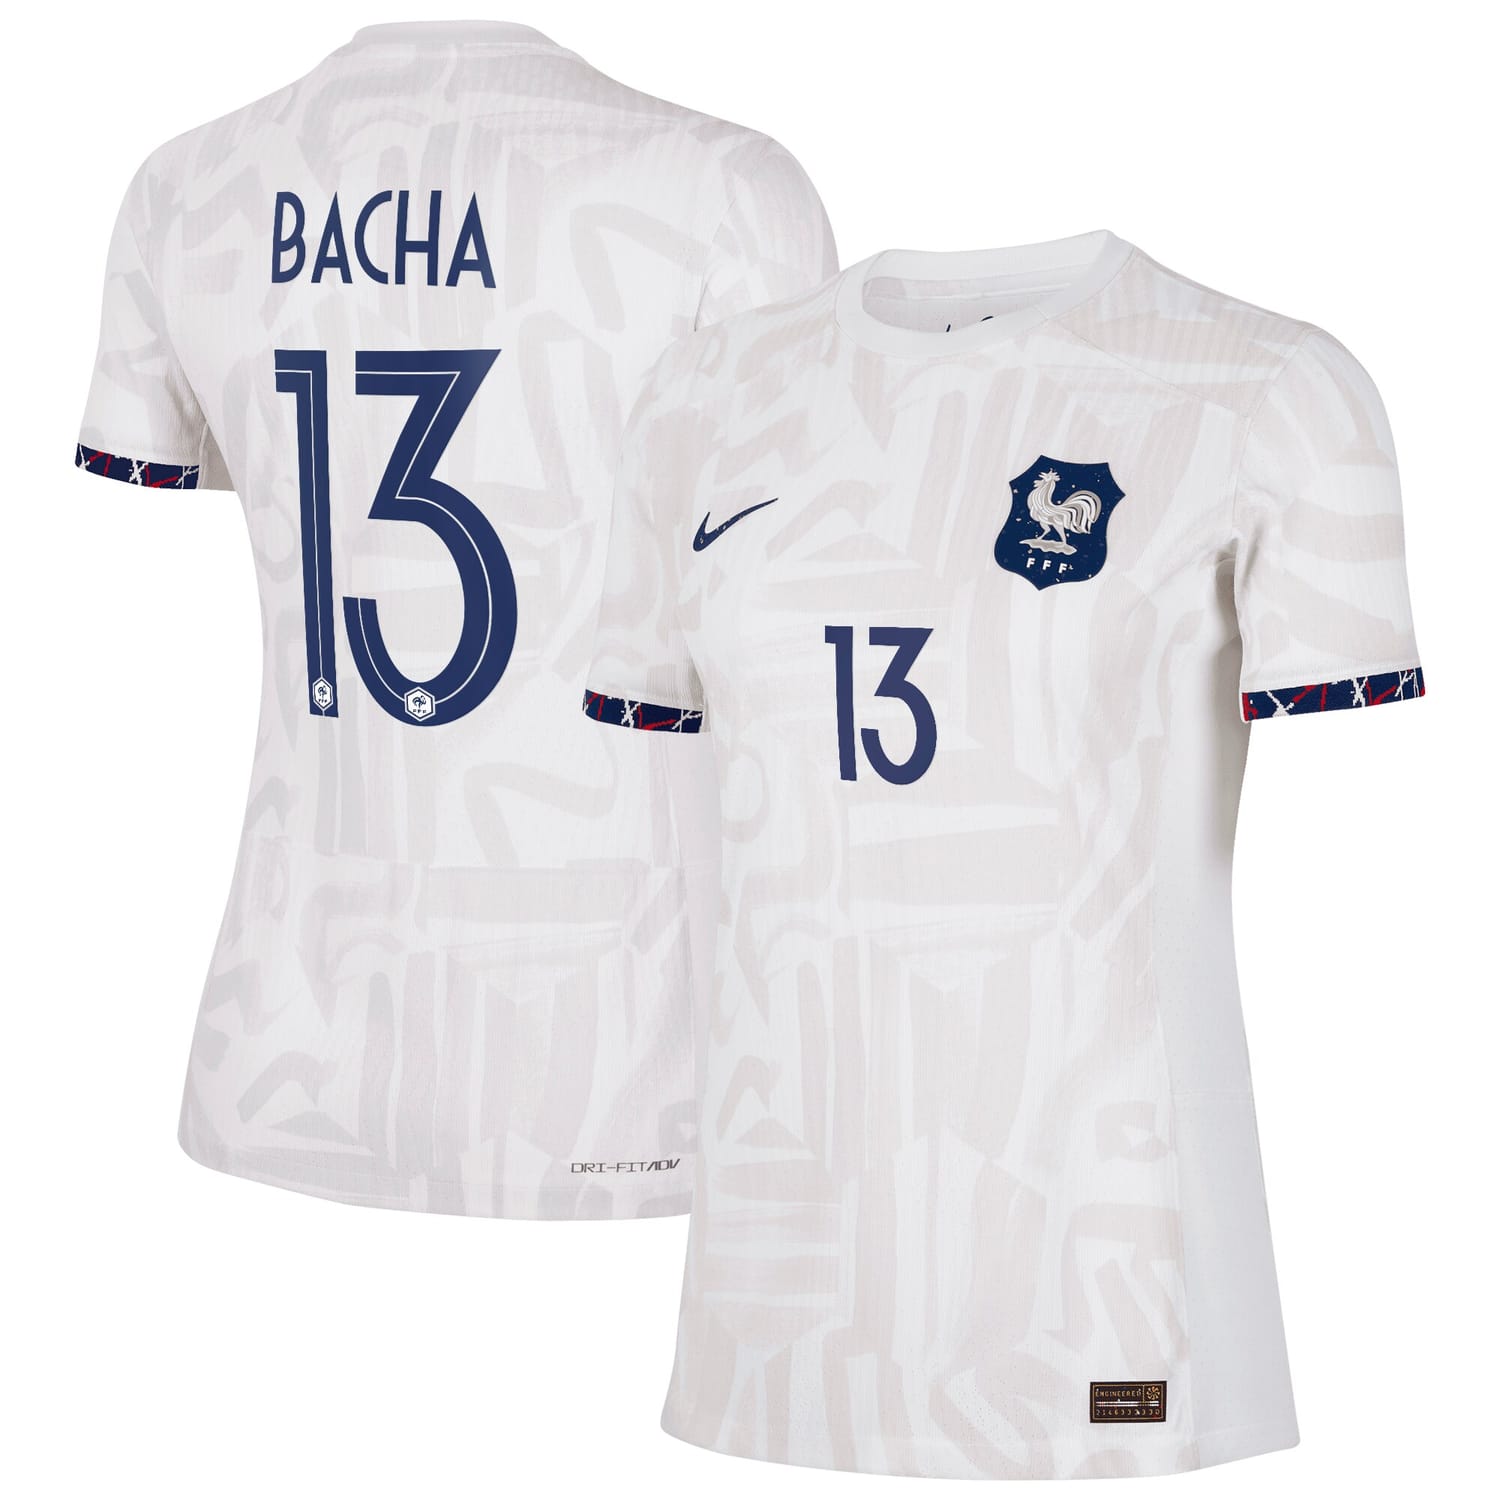 France National Team Away Authentic Jersey Shirt 2023-24 player Selma Bacha 13 printing for Women